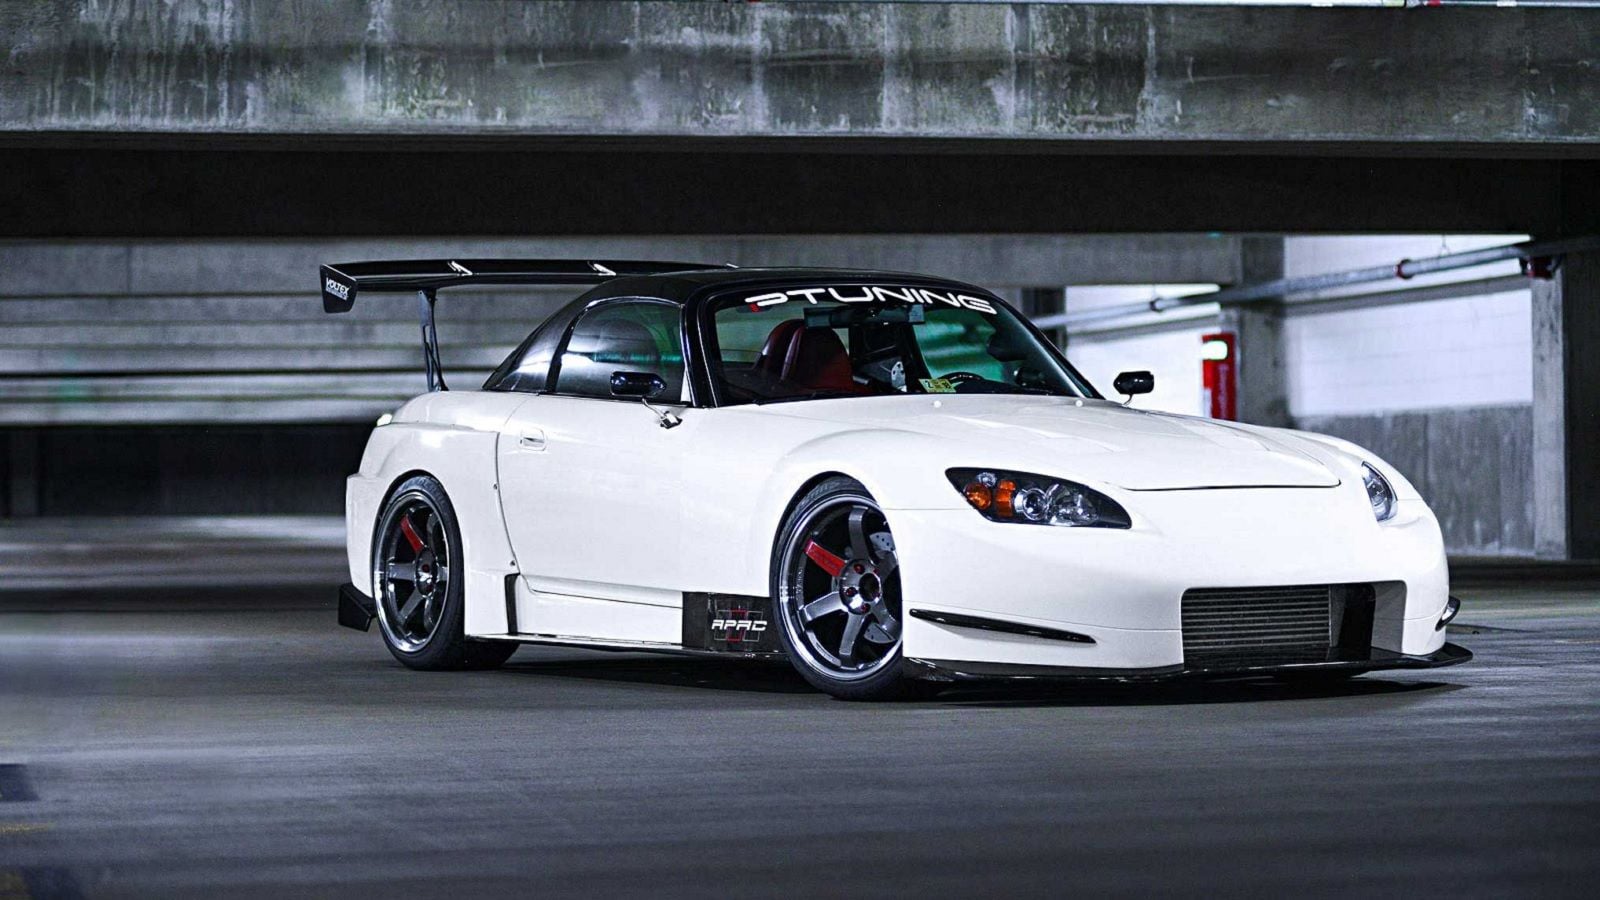 Fine-Tuned S2000 for Max Enjoyment